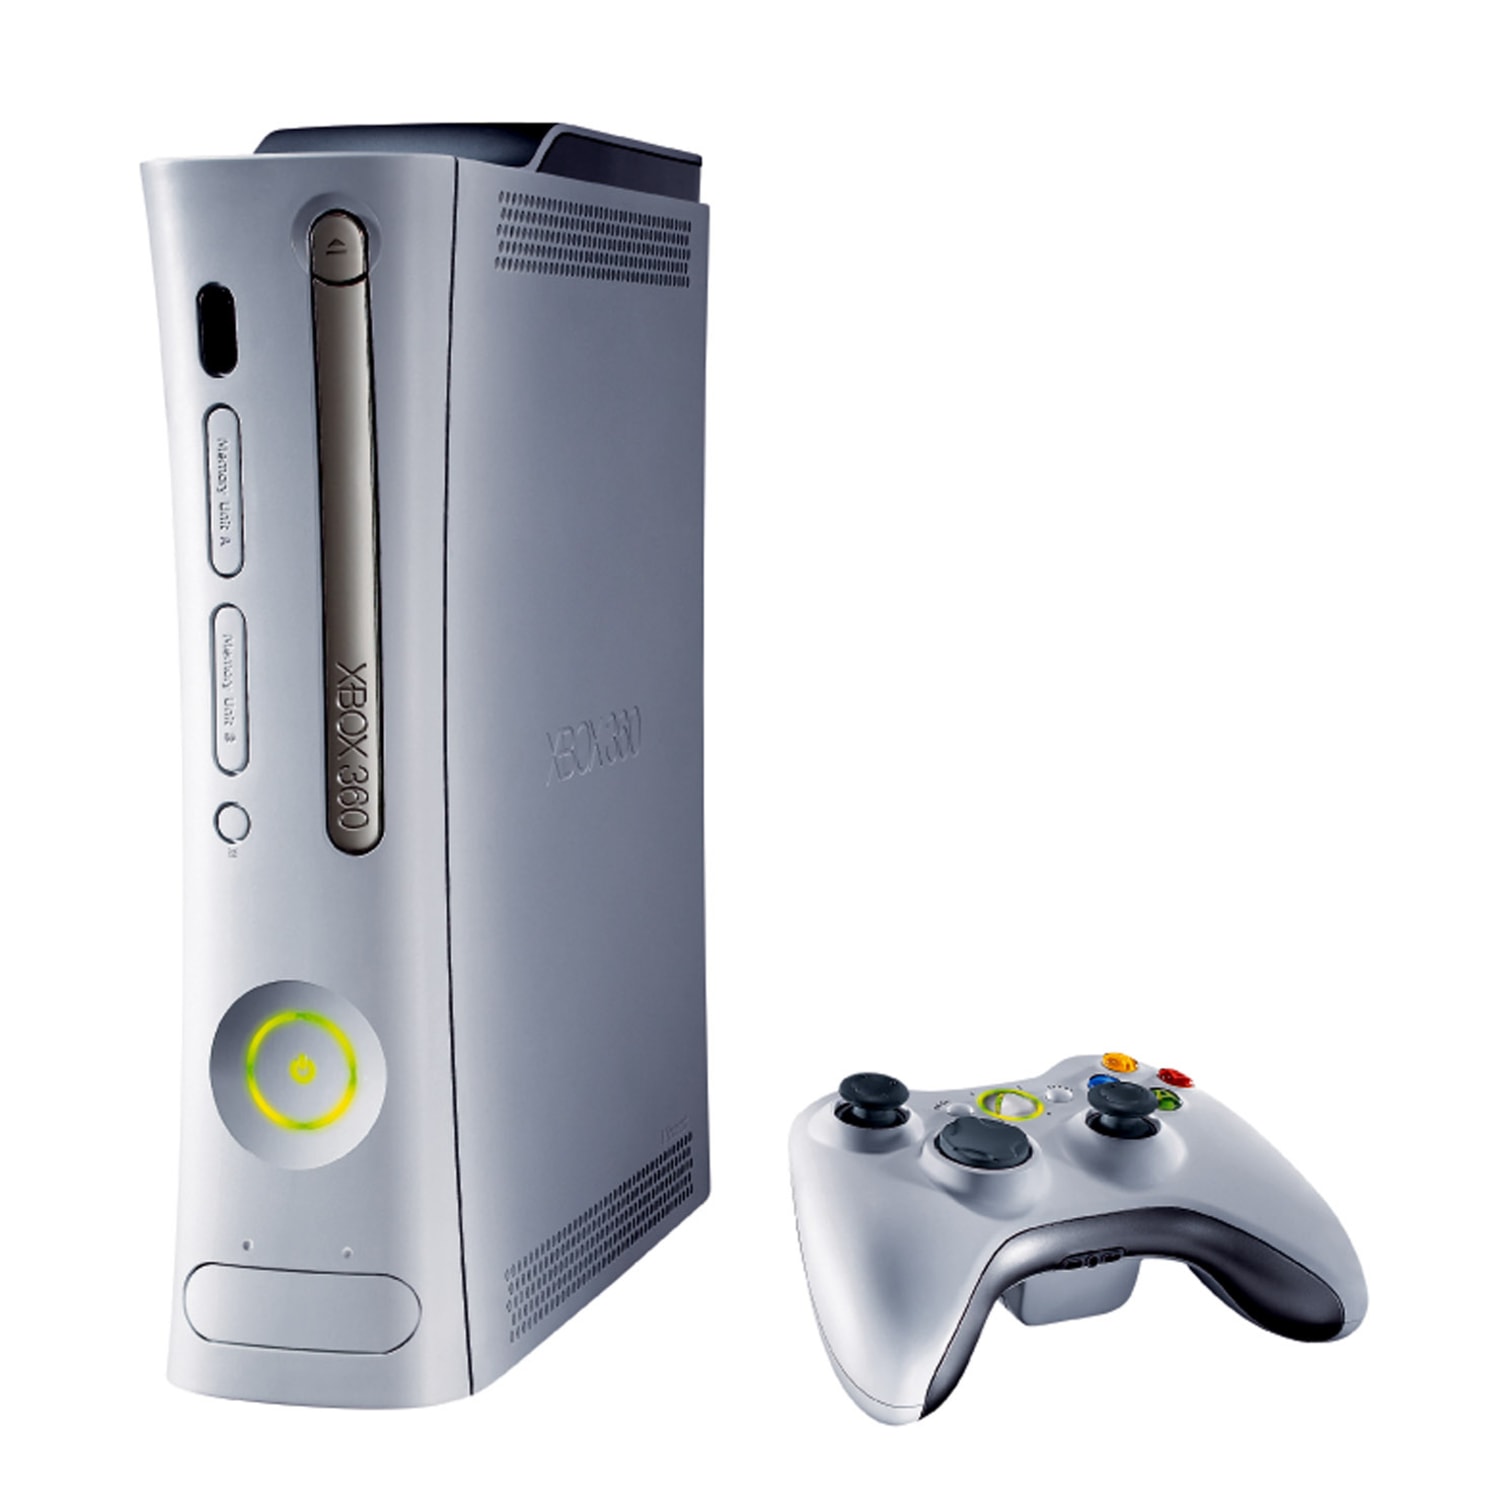 Microsoft is bringing back the Xbox 360 in buildable form